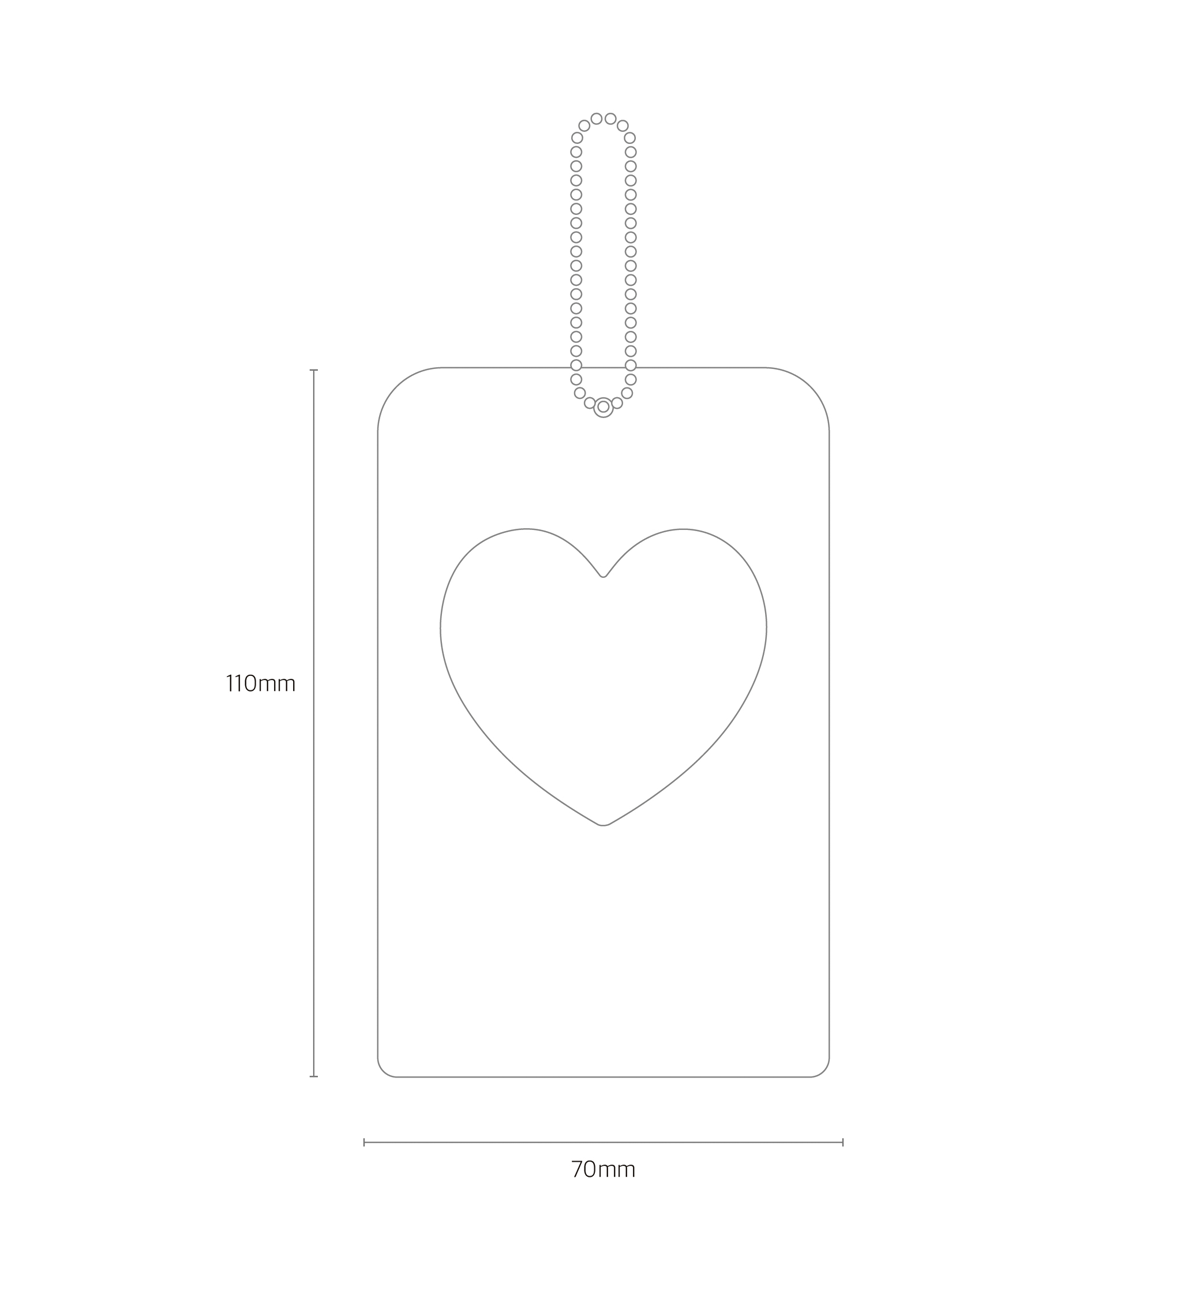 Cute & Cool Heart Charm Photocard Holder [Pink Strawberry]